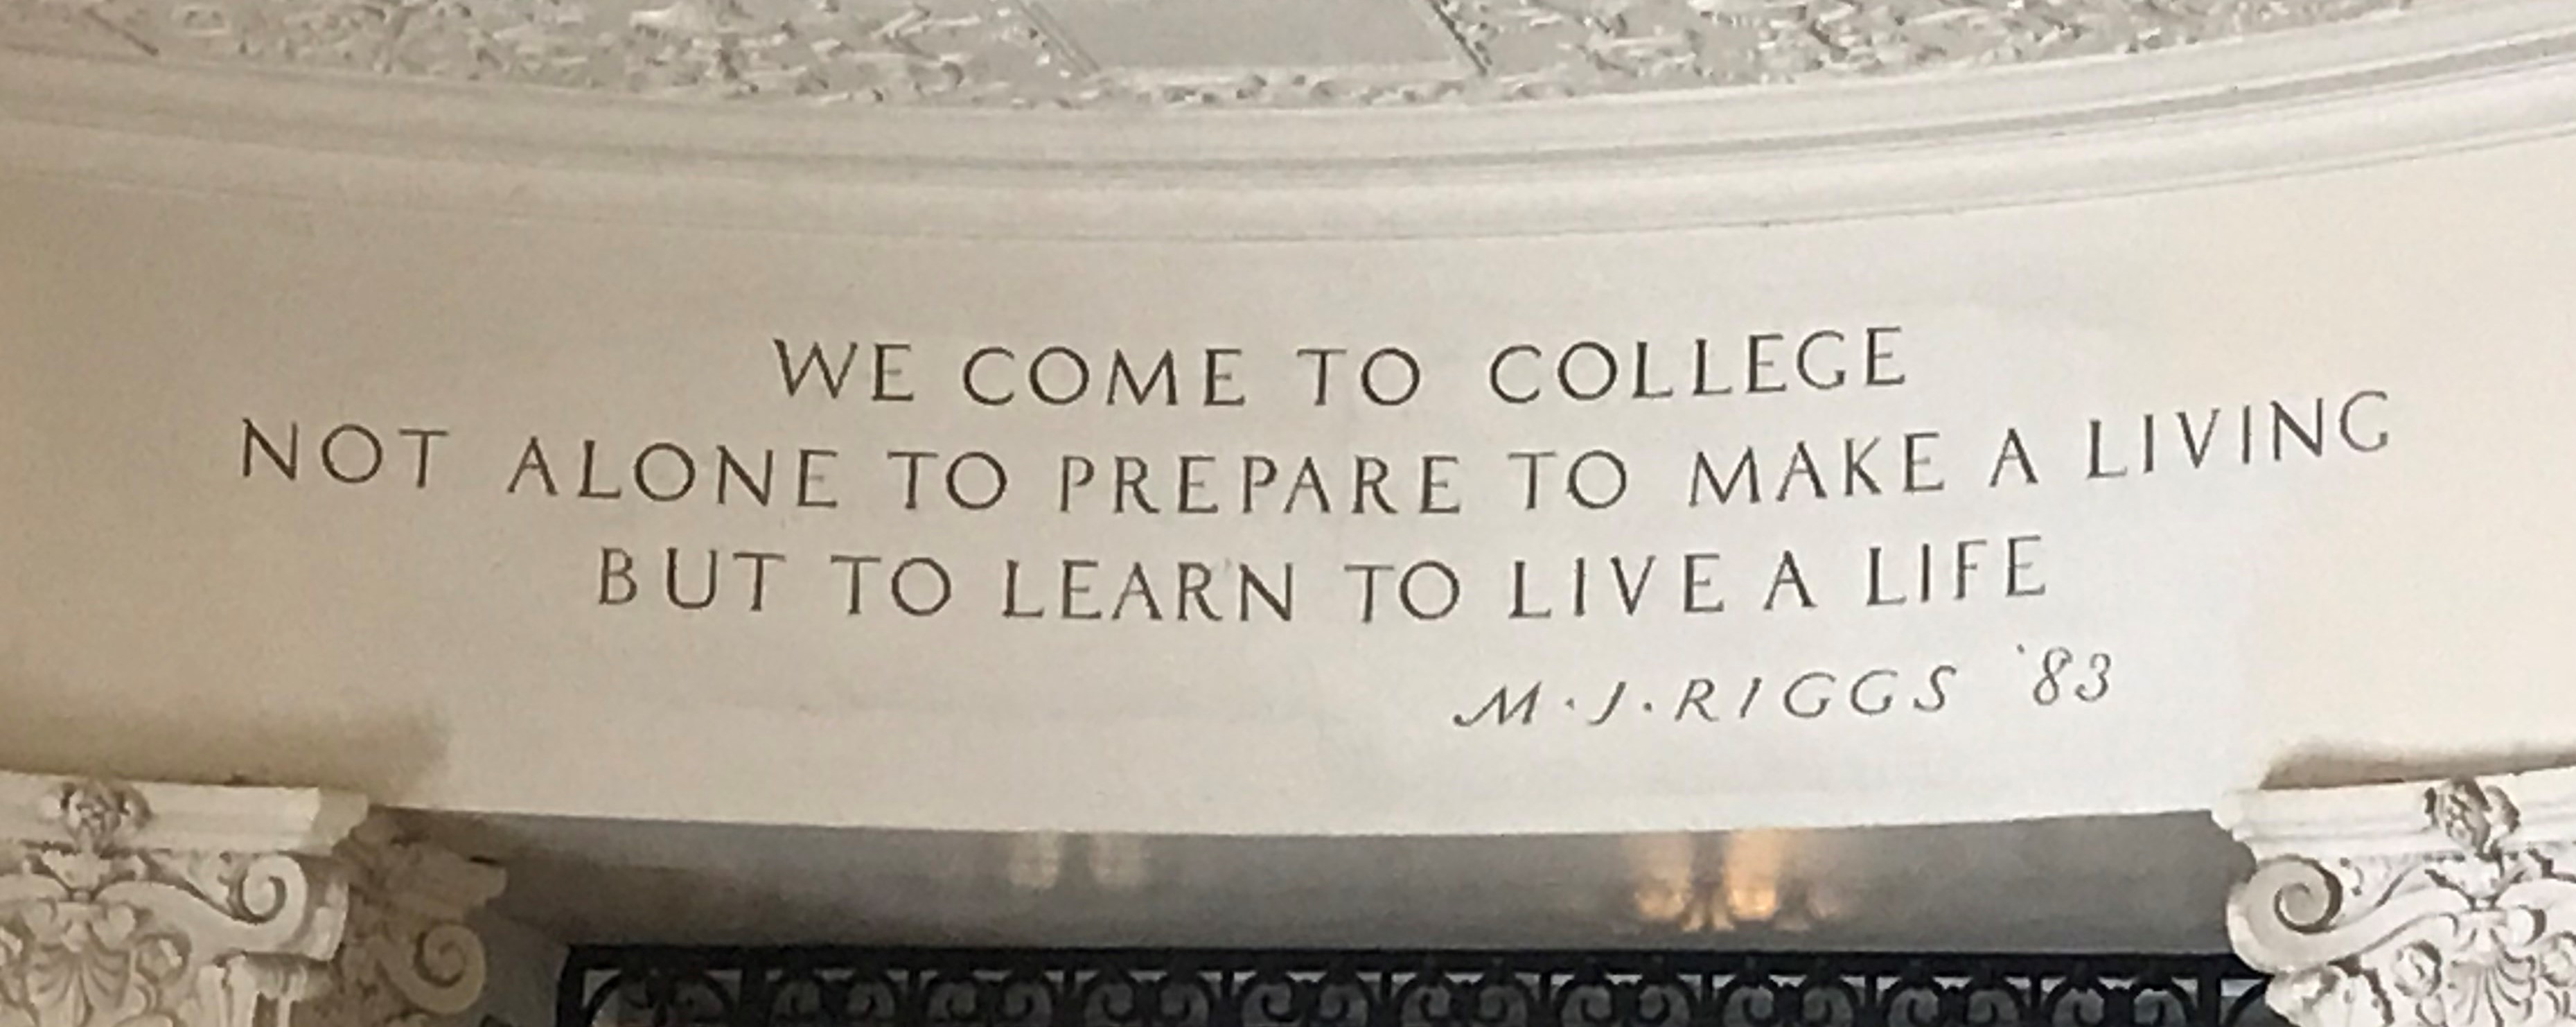 ''We come to college not alone to prepare to make a living but to learn to live a life.'' M.J. Riggs, '83